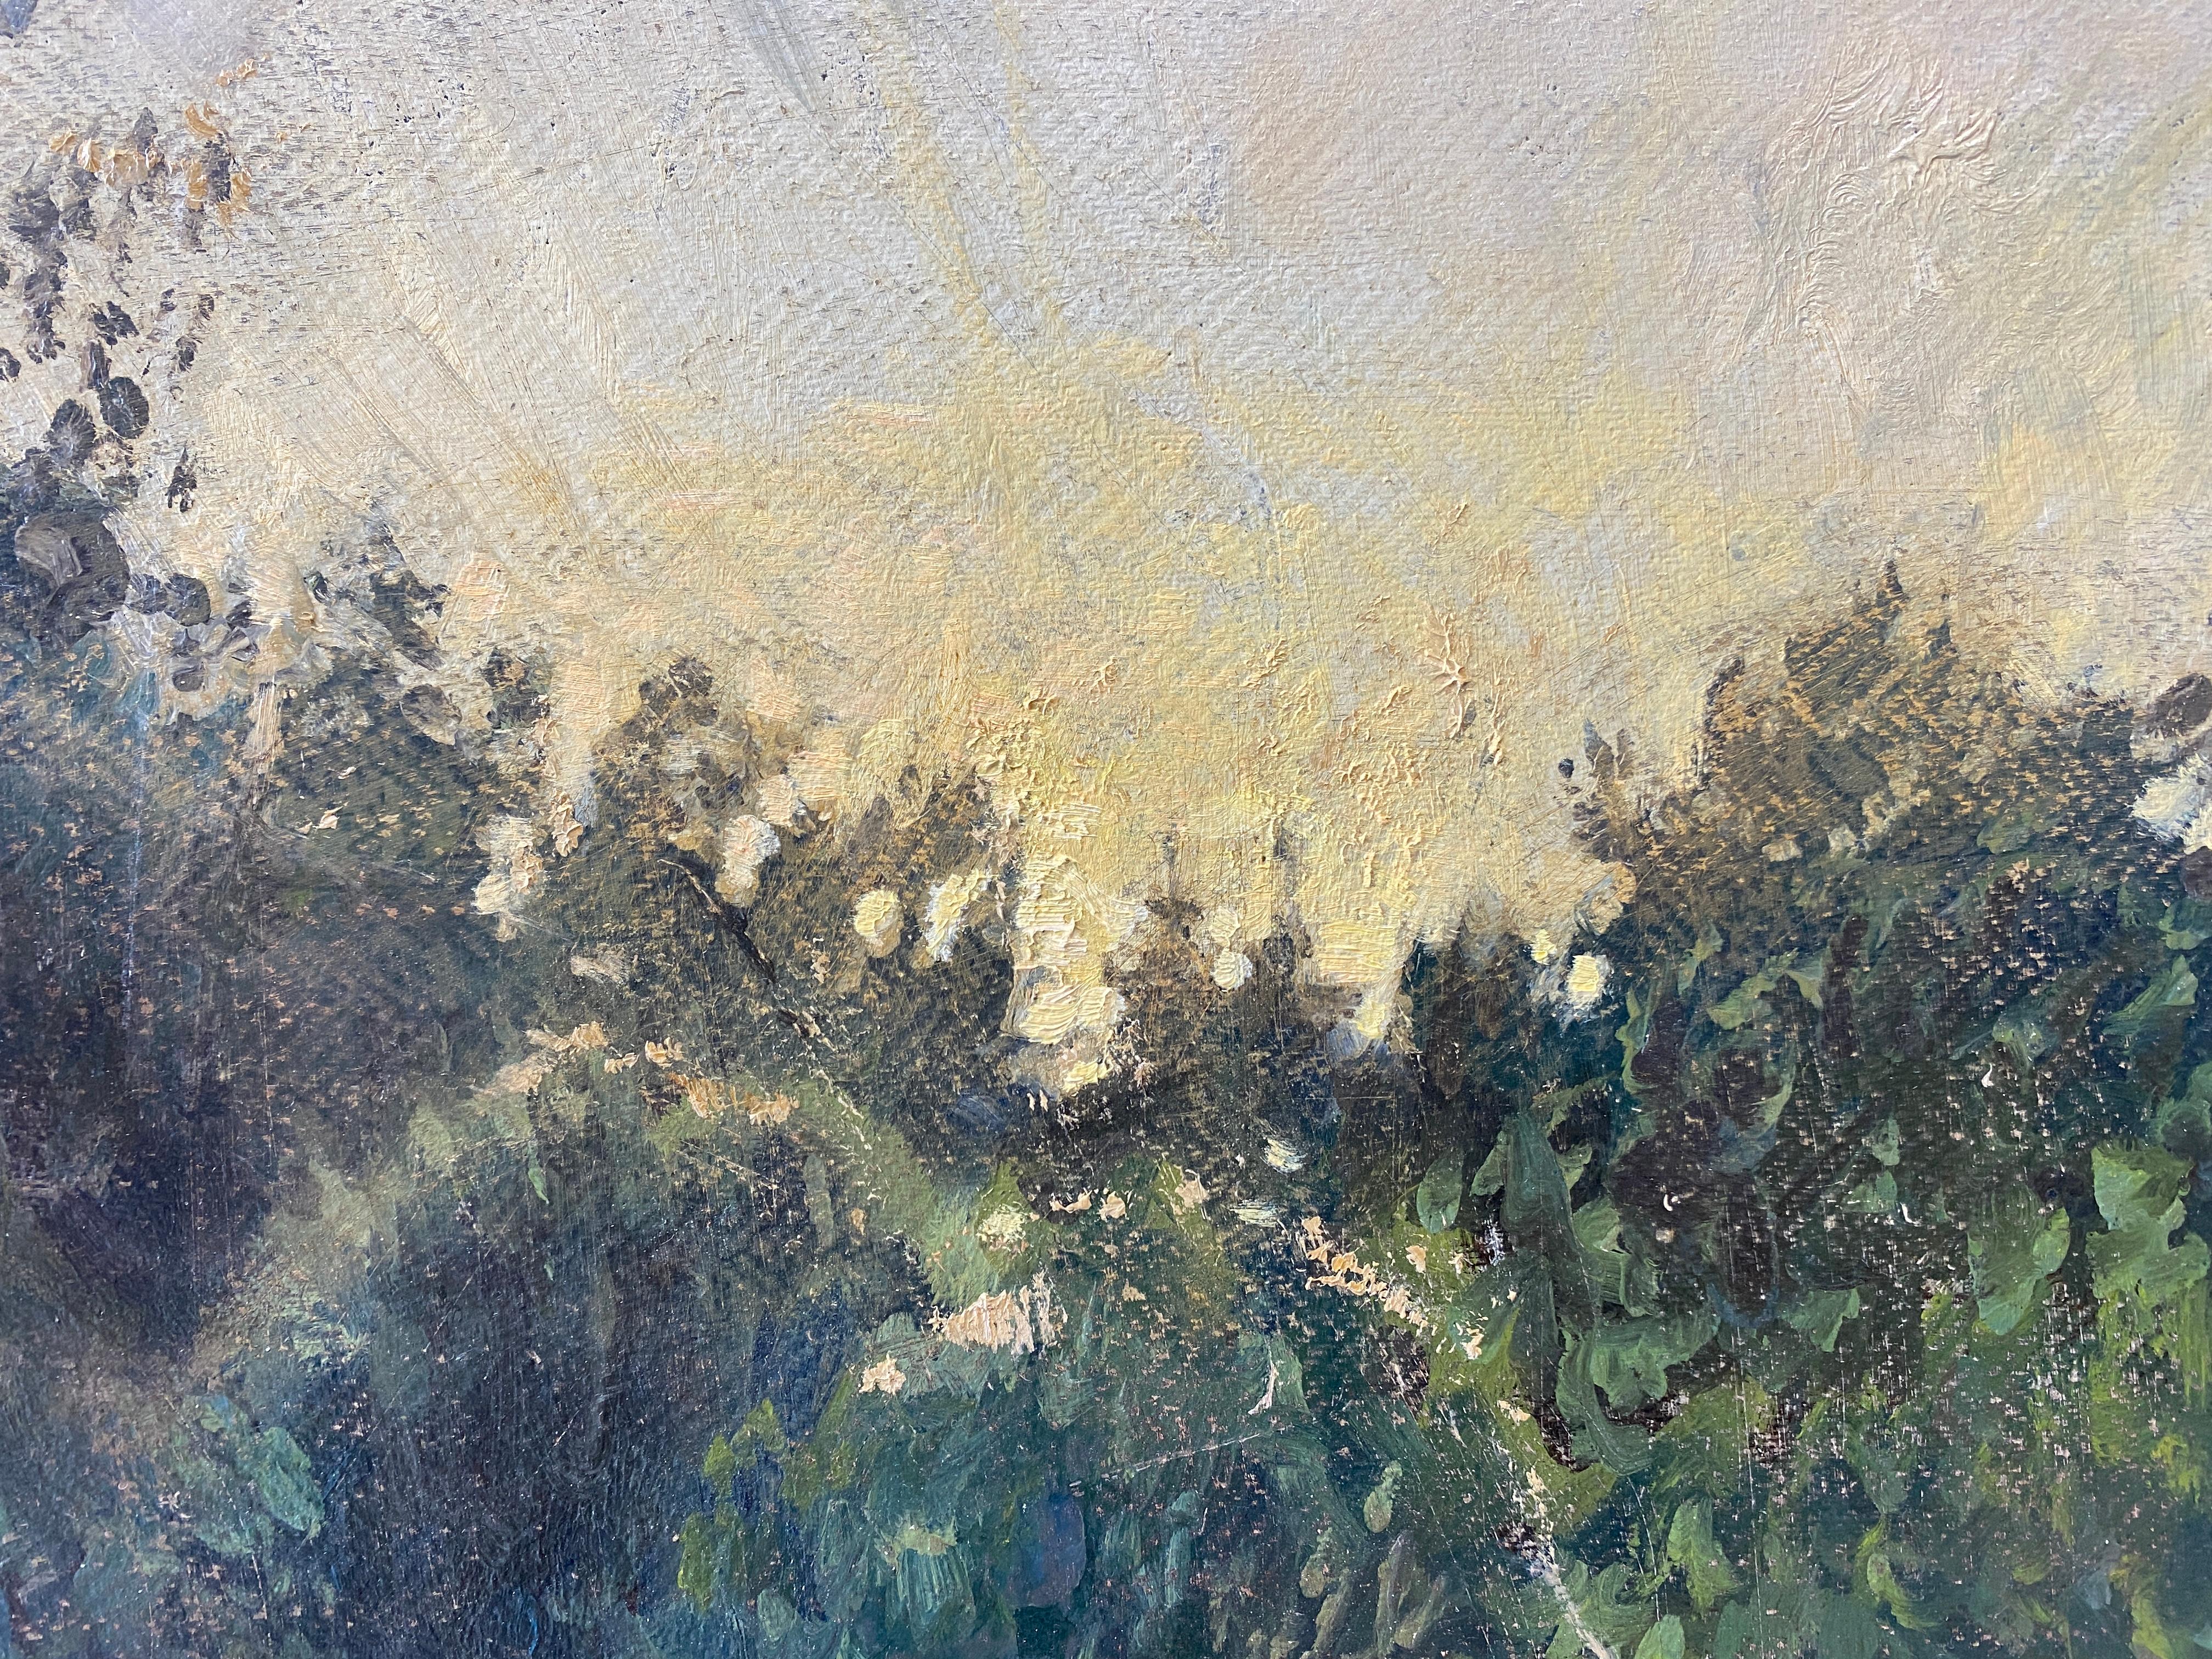 An oil painting of a glowing sunset beyond a verdant patch of trees, painted en plein air, in Norway, while Personett was apprenticing at Odd Nerdrum's studio. 

Painting dimensions: 22 x 18 inches
Framed dimensions: 25 x 21 x 1 inches

Framed in a